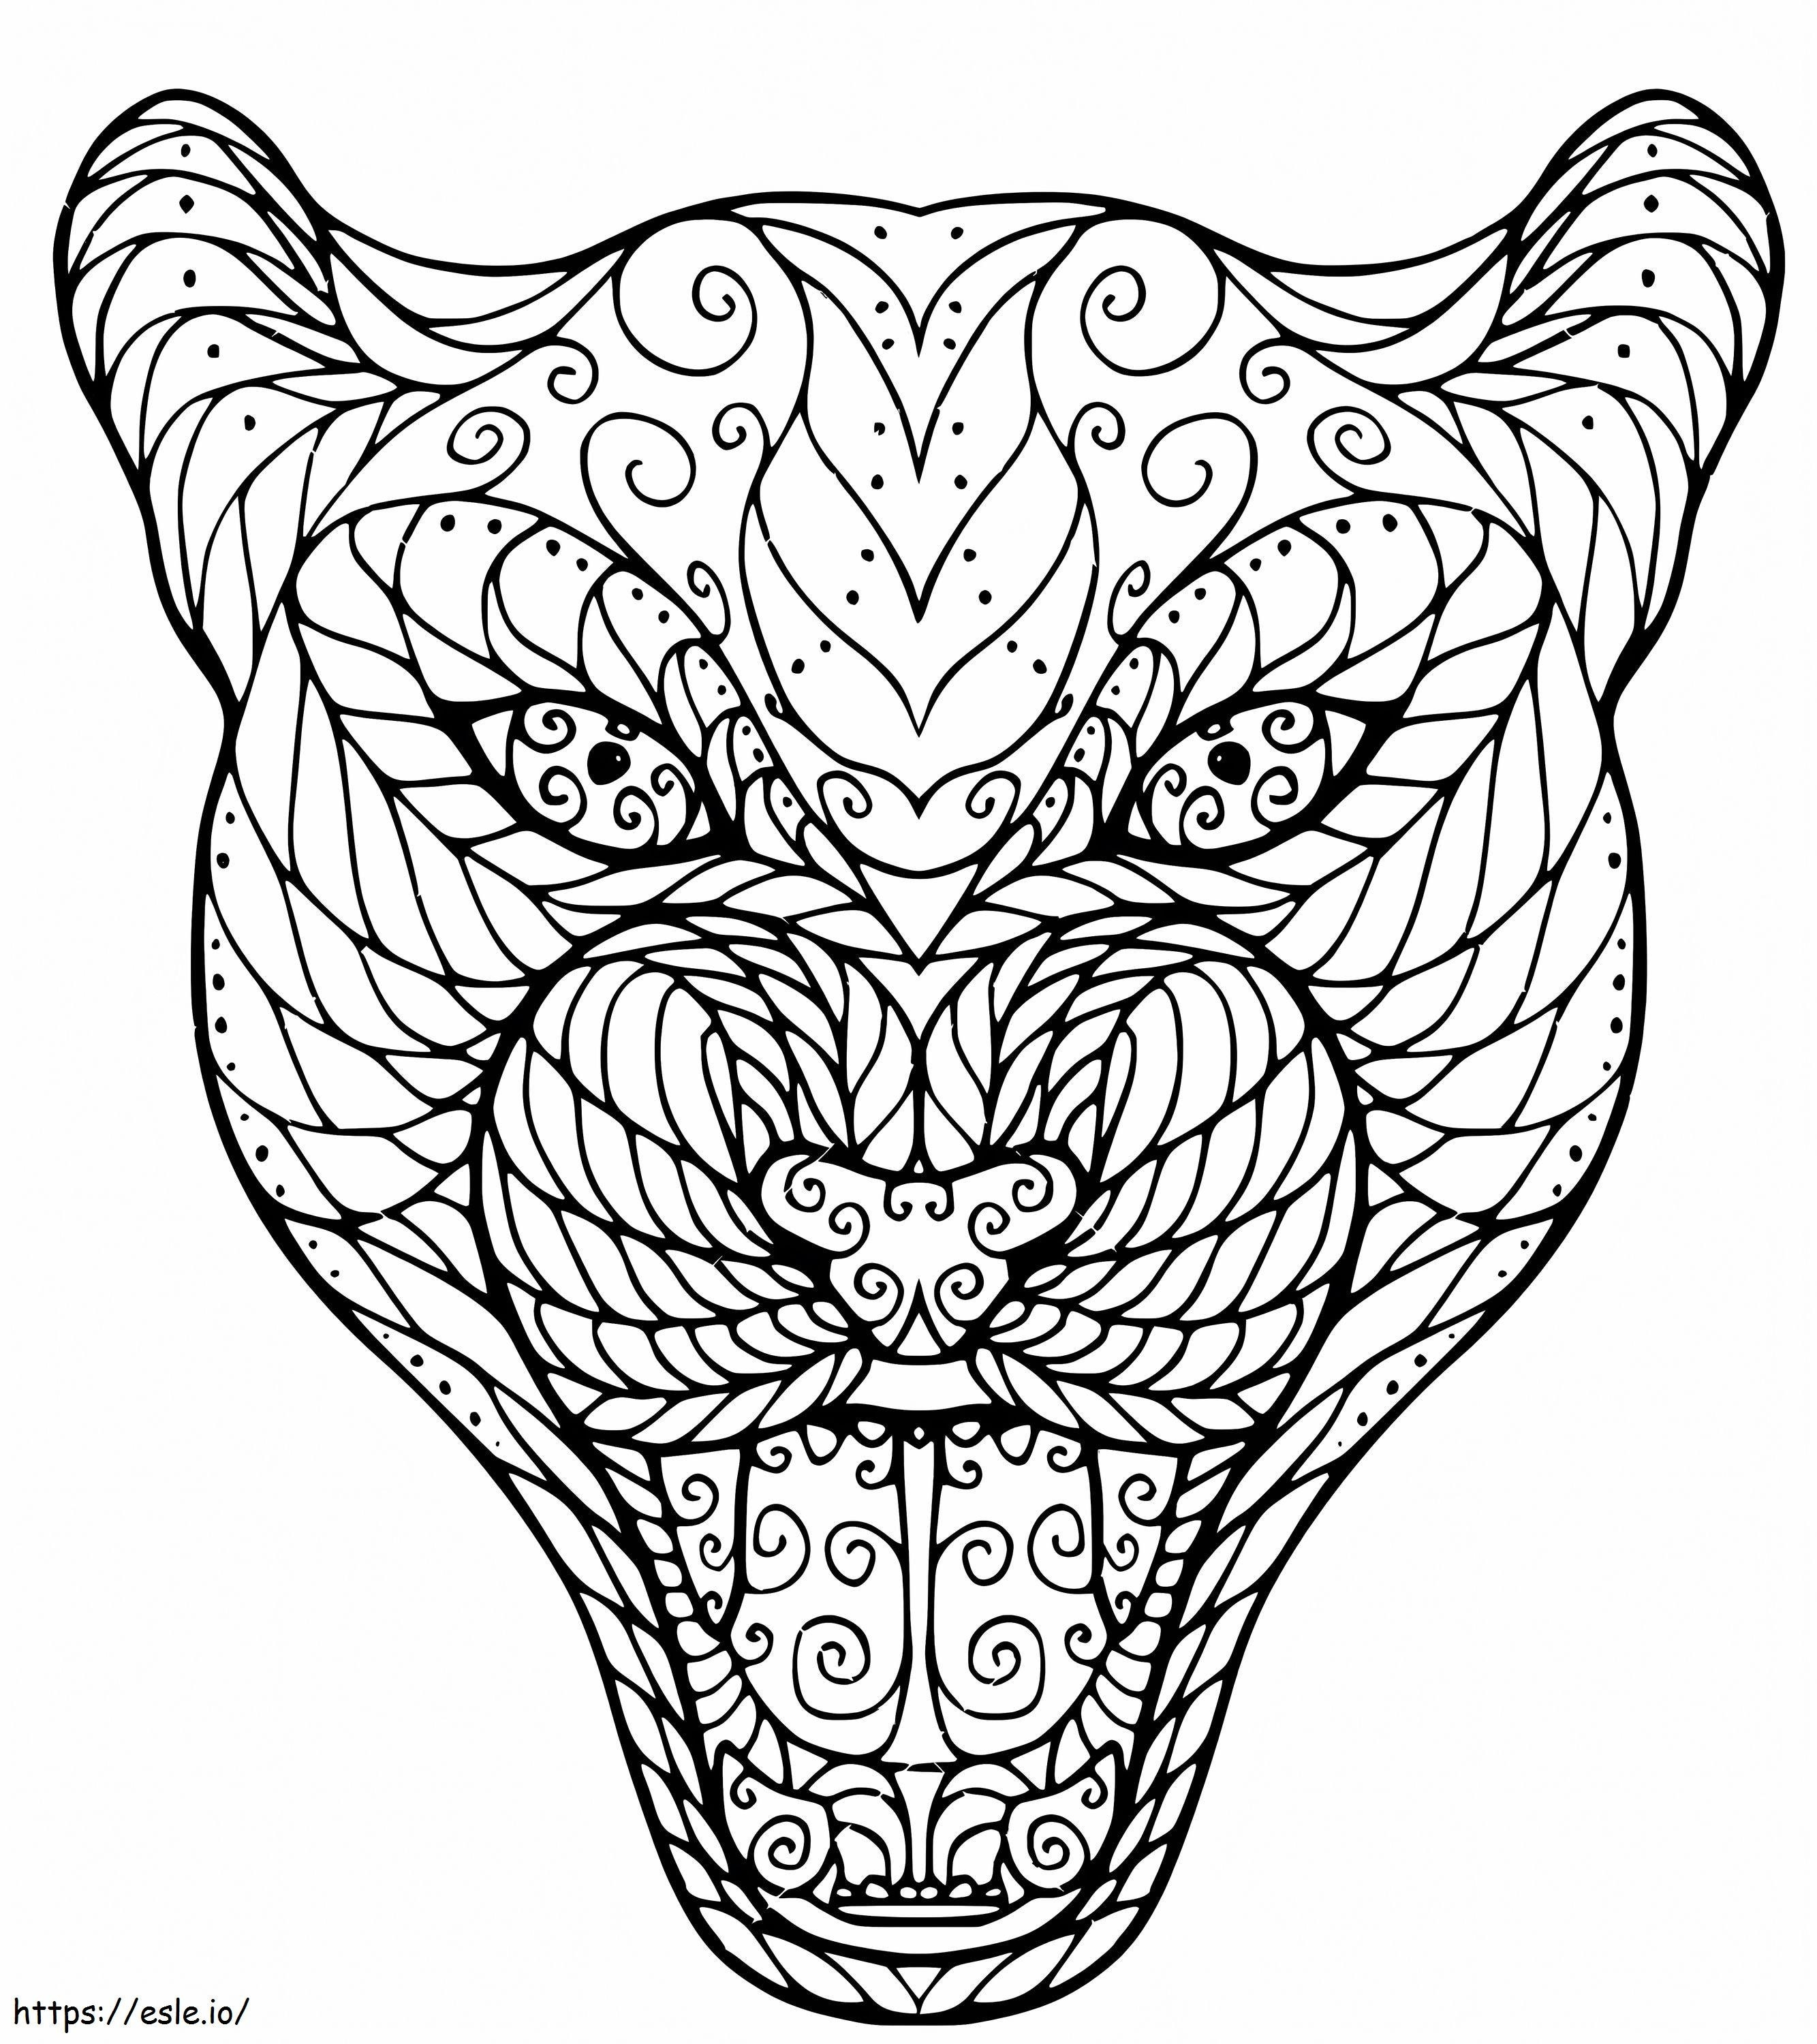 Zen Tangle Leopard Head coloring page